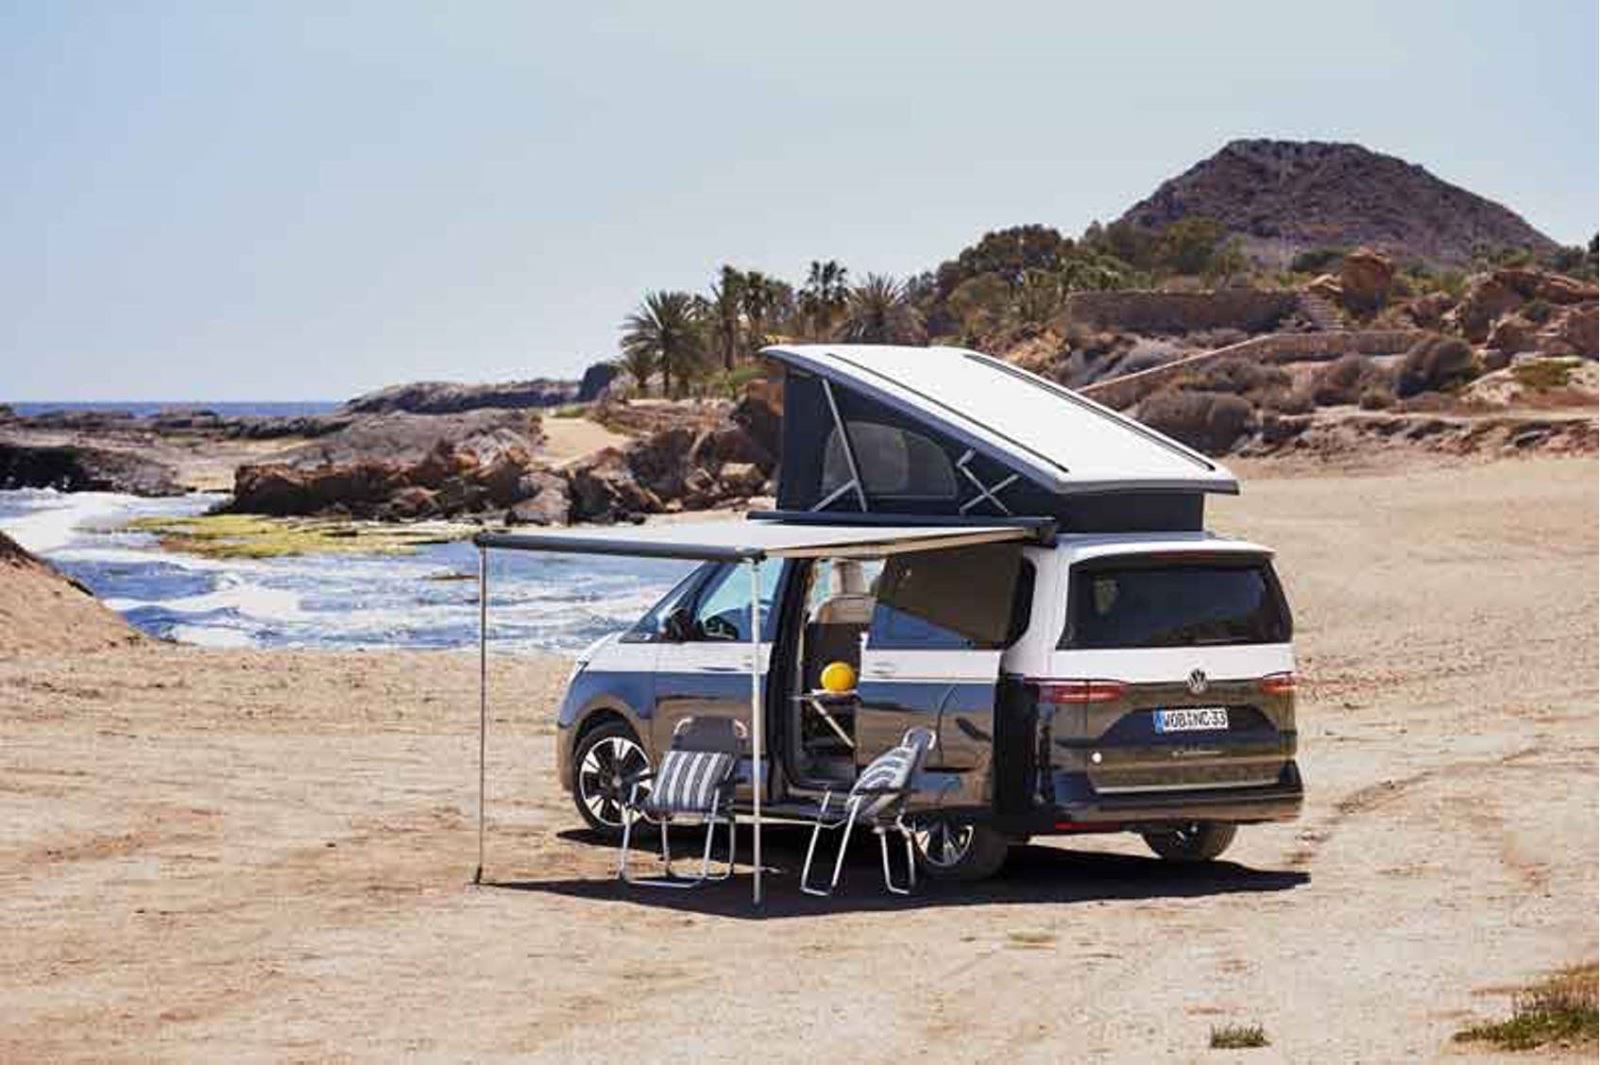 Two-tone paintwork is available on the new VW California campervan